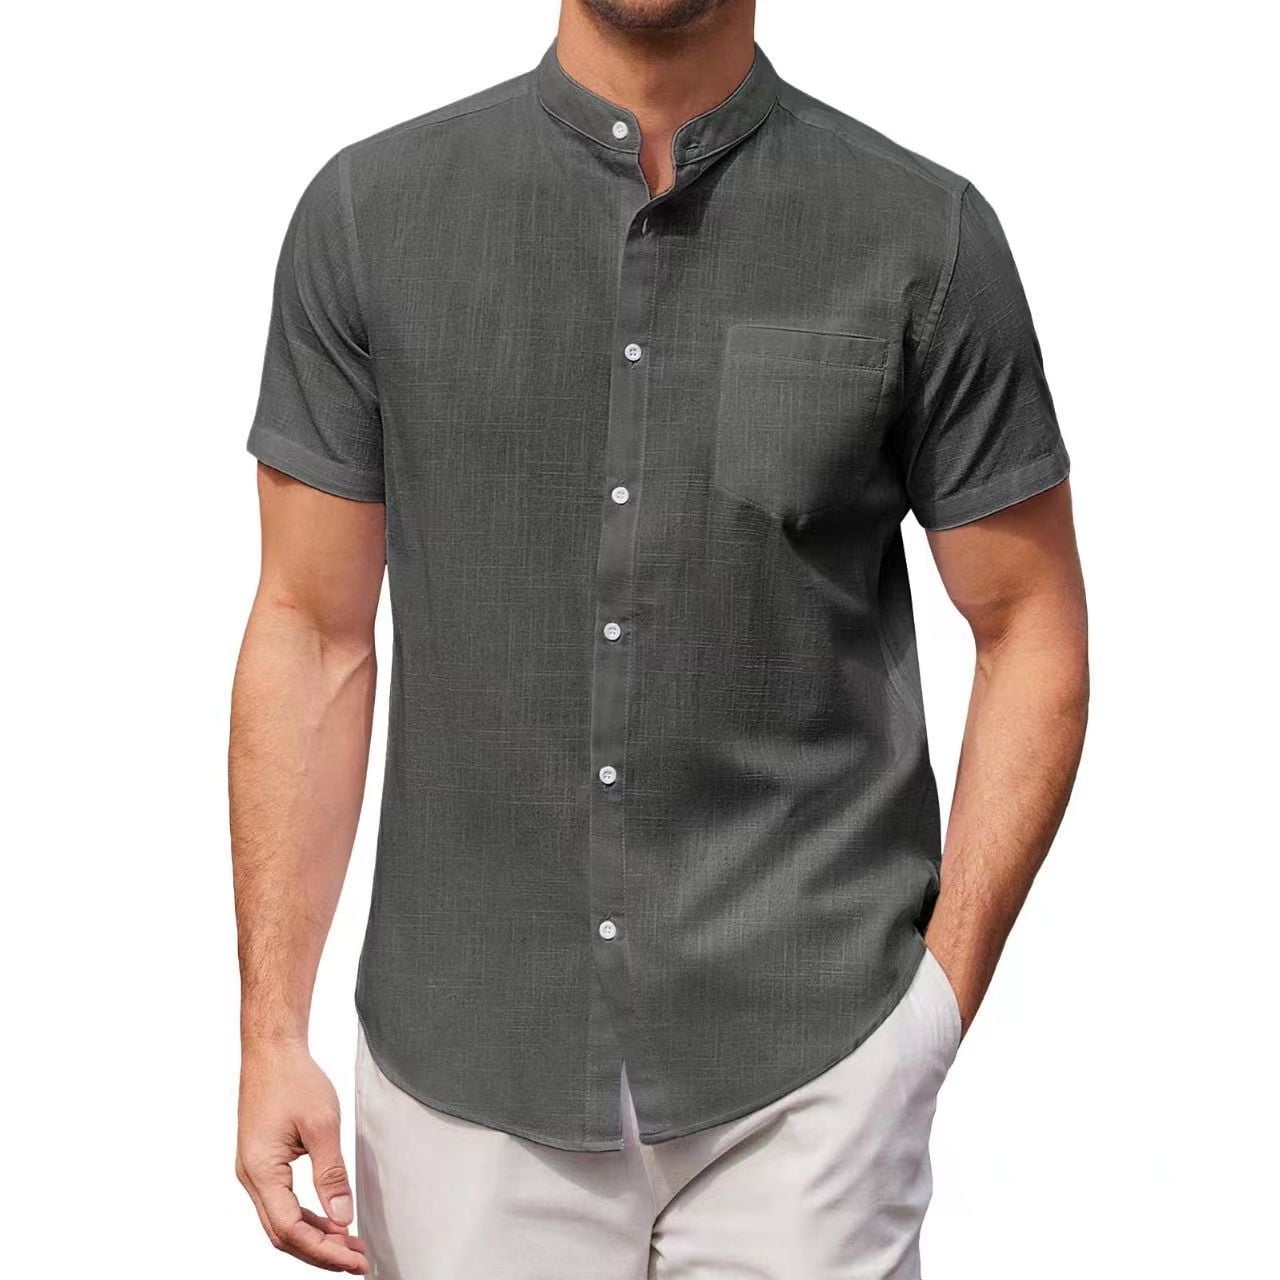 RYRJJ Mens Banded Collar Linen Cotton Shirts Casual Summer Beach Button-Down  Short Sleeve Shirts with Chest Pocket(Dark Gray,S) 